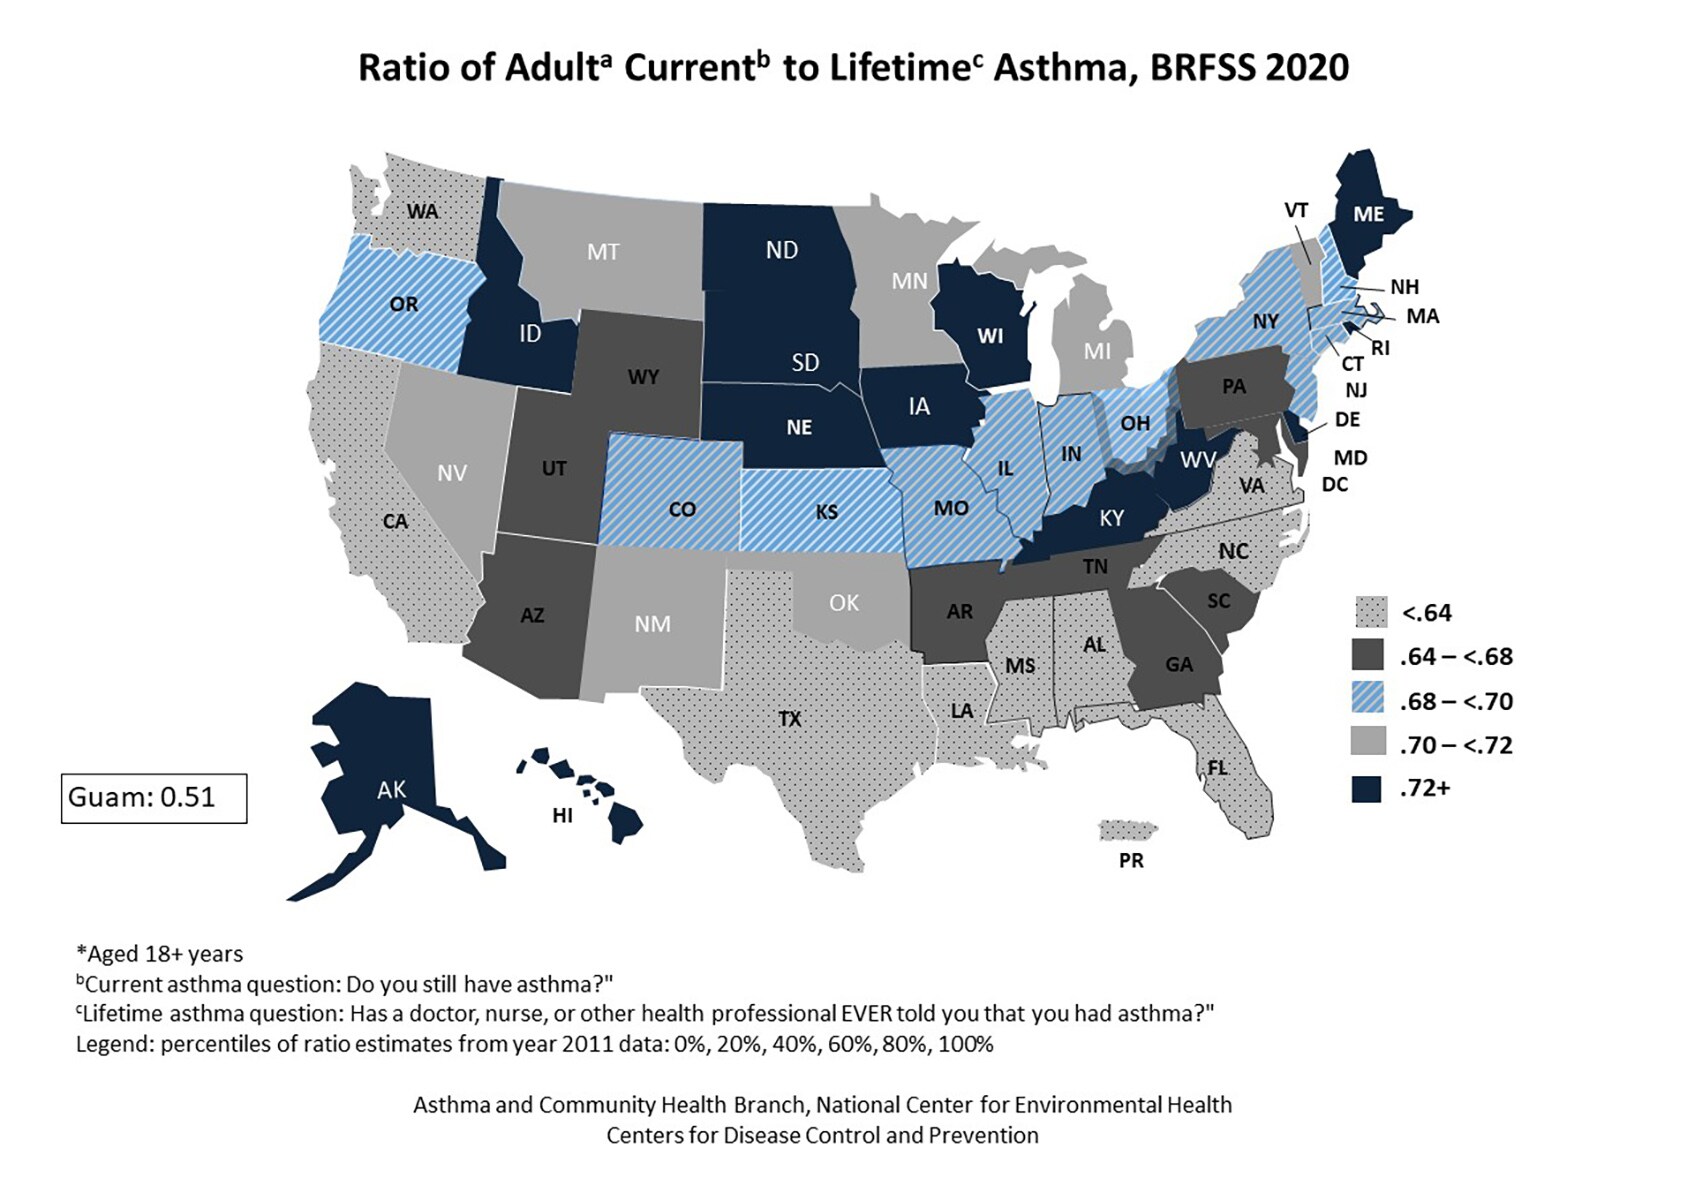 Black and white U.S. map showing ratio of adult self-reported current to lifetime asthma by state for BRFSS 2020